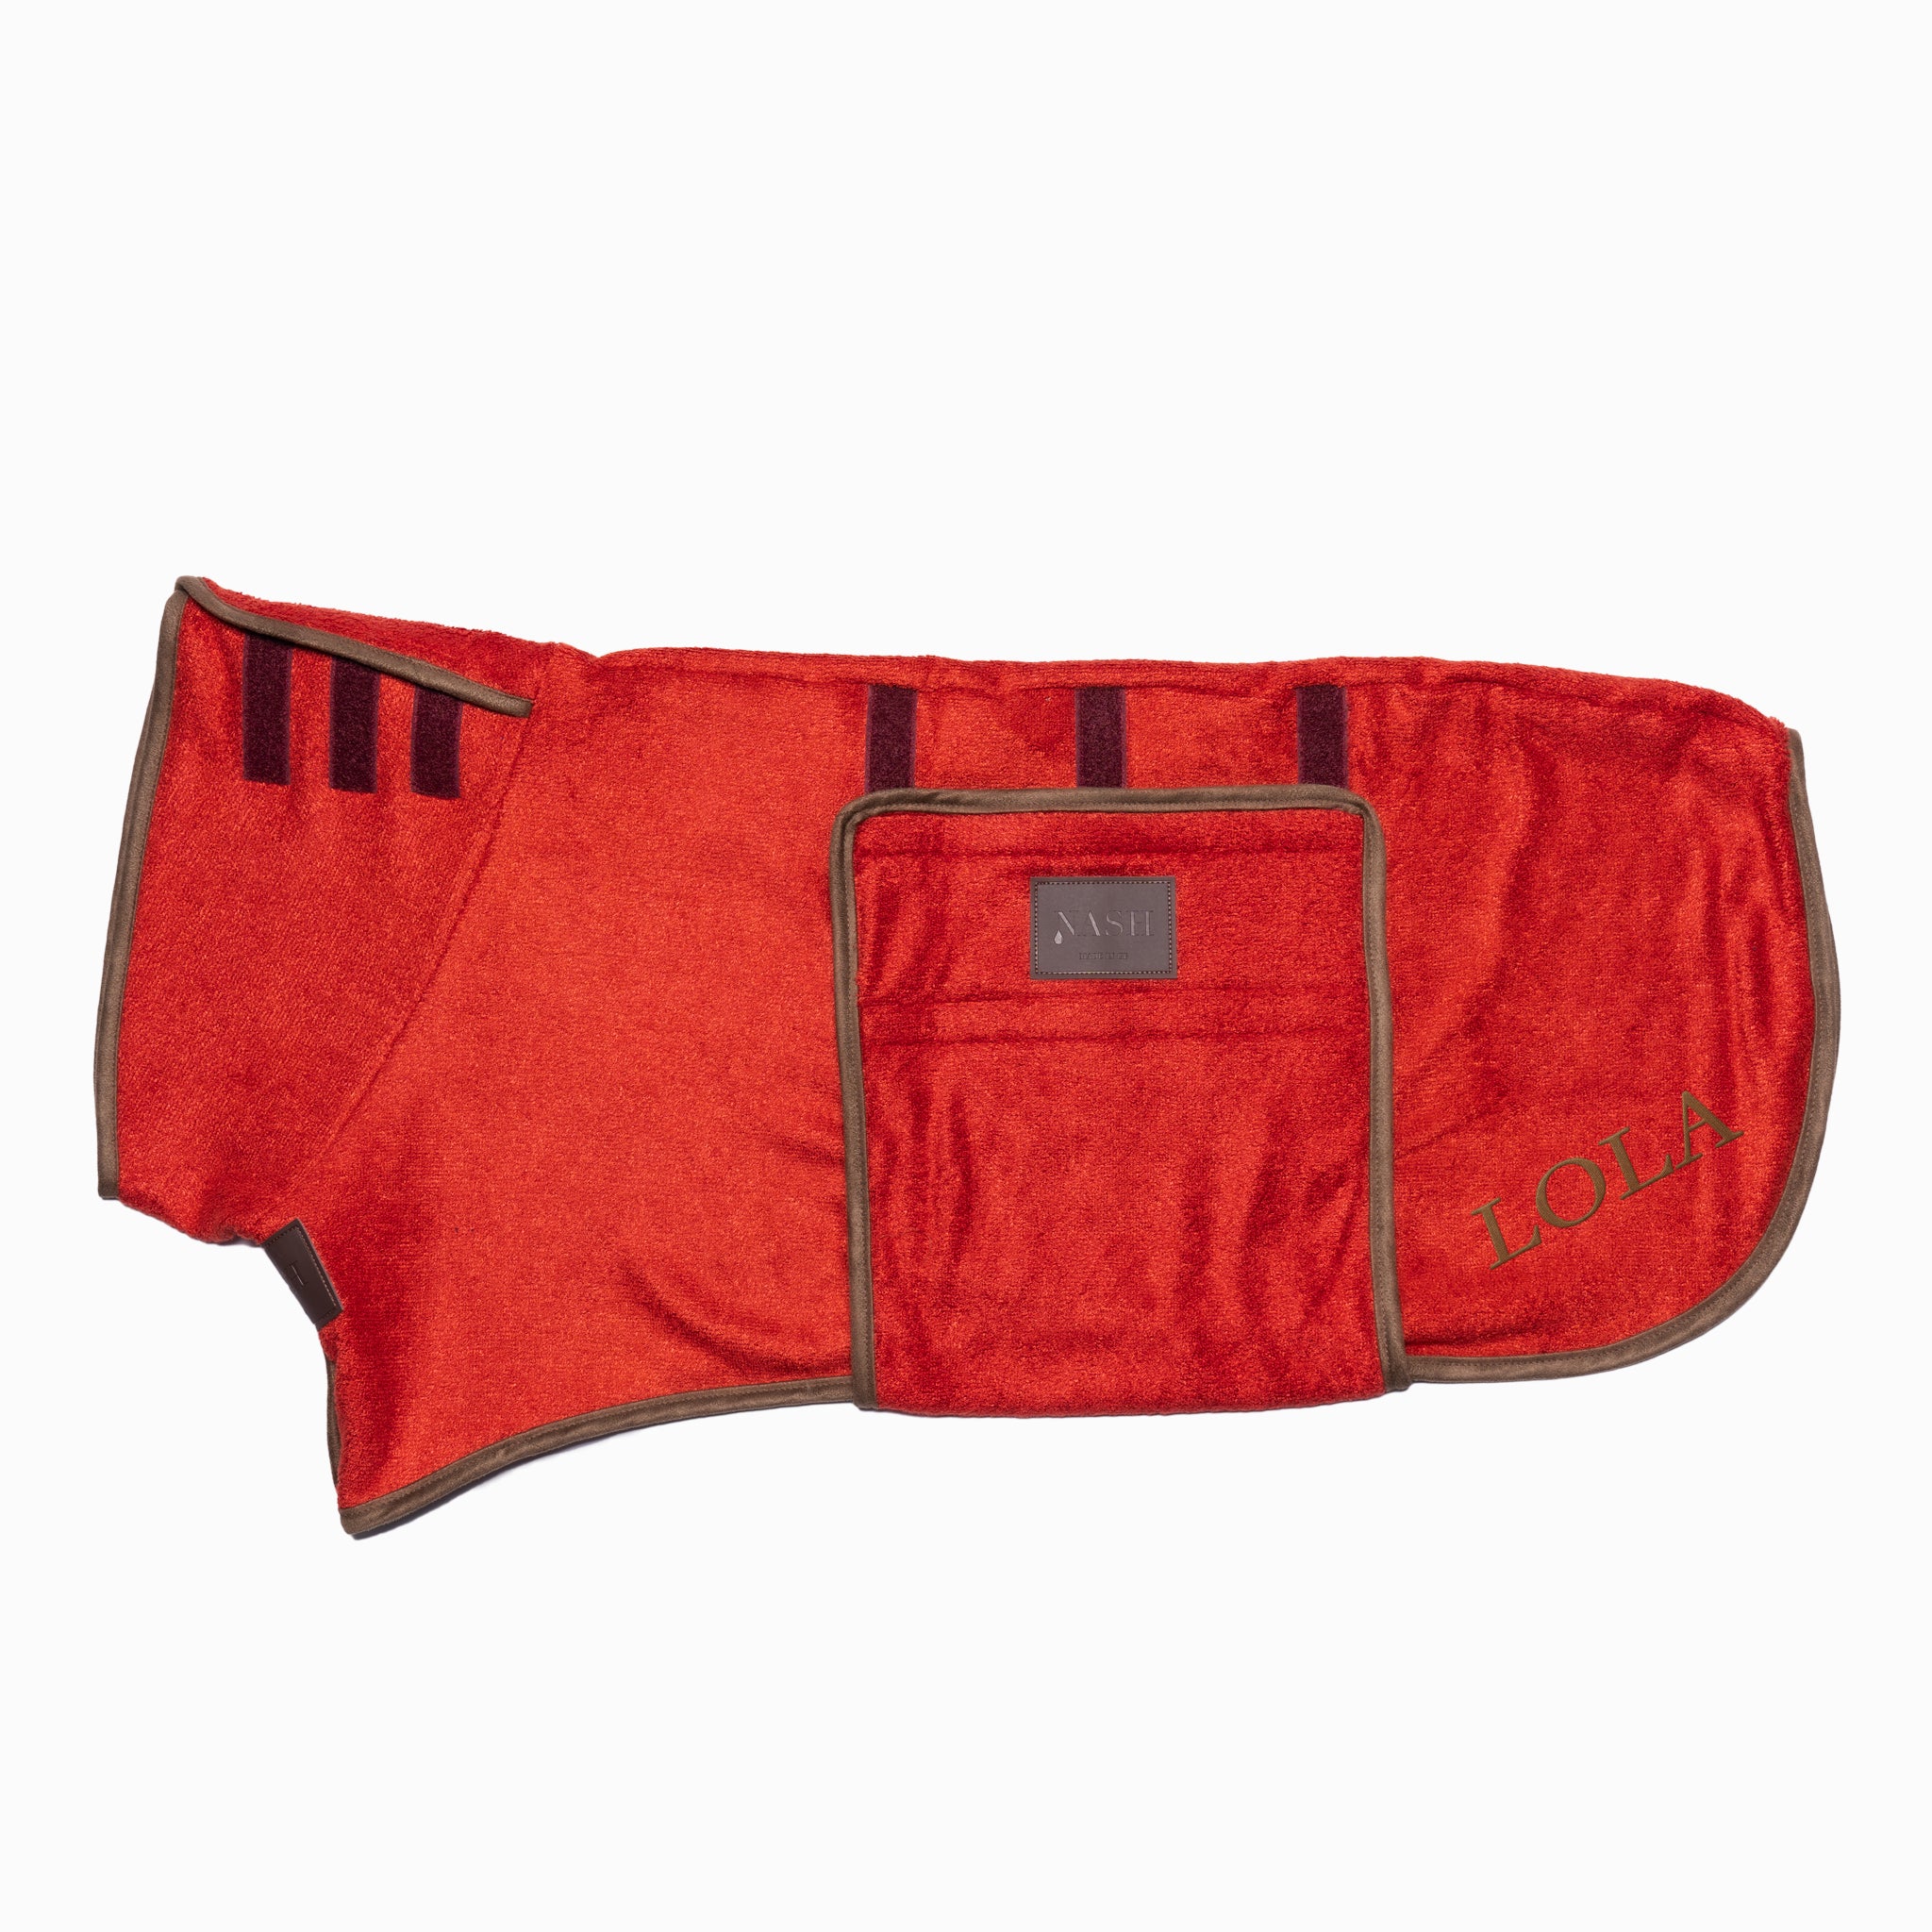 The premium NASH bamboo dog drying coat in red. 